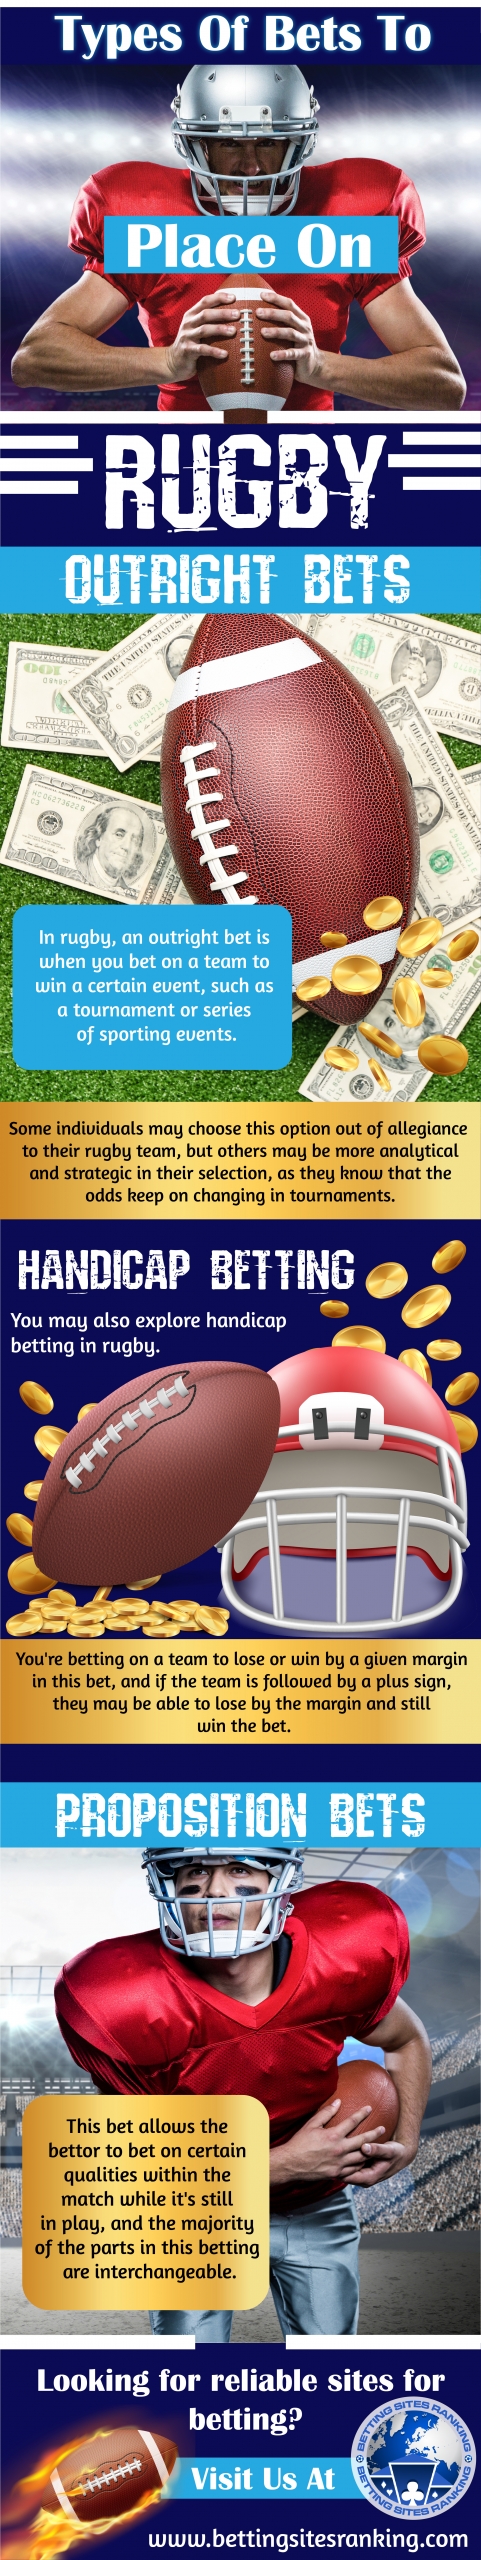 Types-Of-Bets-To-Place-On-Rugby